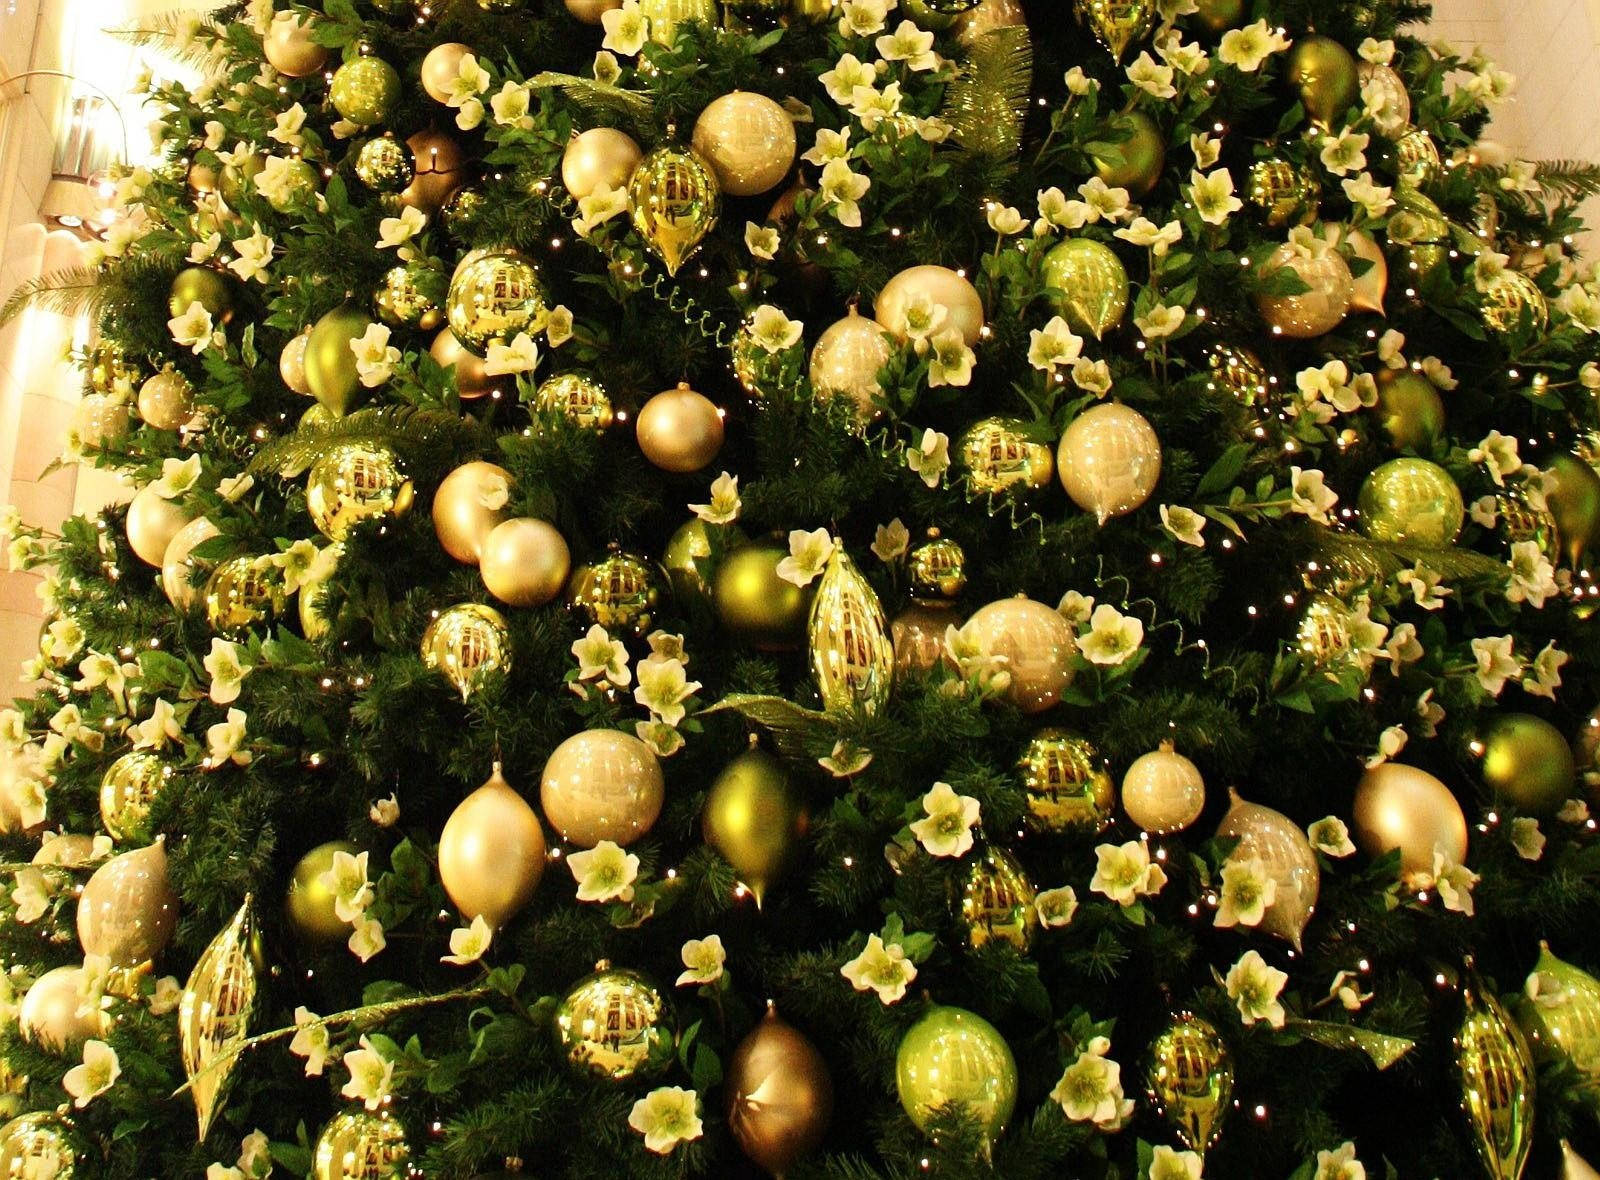 Celebrate Christmas with Joyful Green and Gold Christmas Tree Decorations Wallpaper